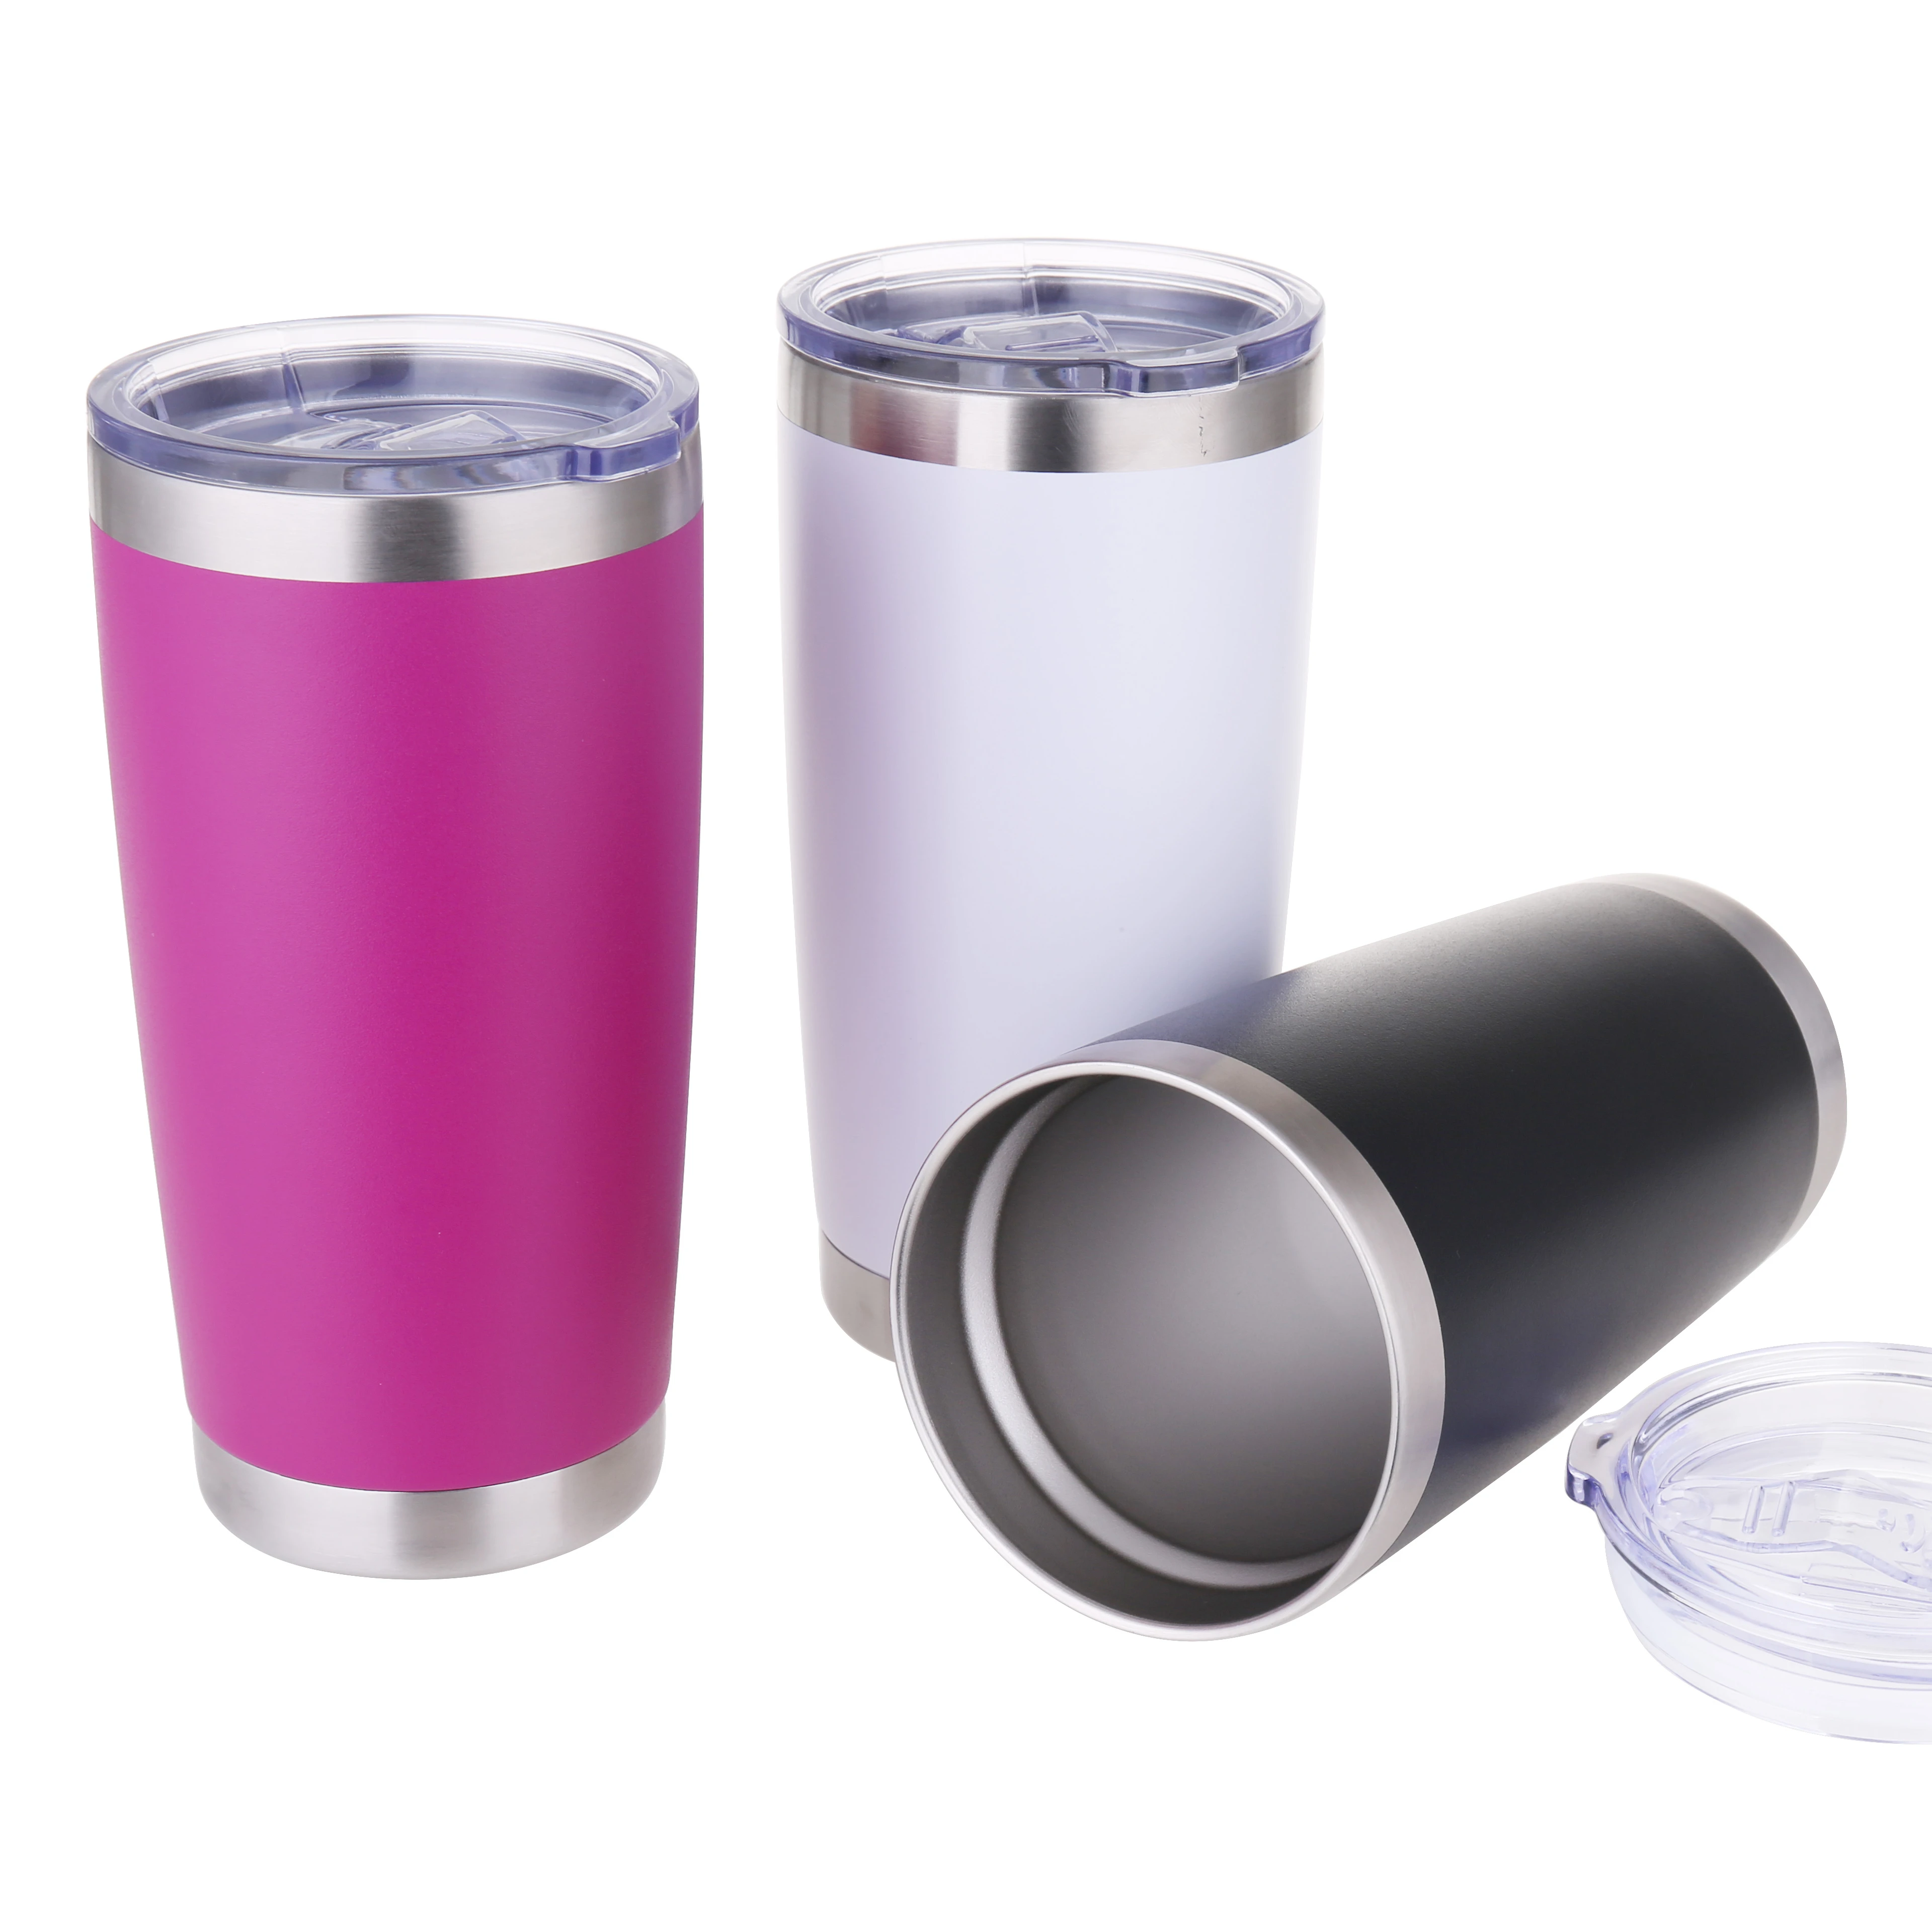 

Hot sell 20 oz Coffee Sublimation Mug Double Wall Vacuum Beer Mug Insulated Tumbler with Lid, Any color